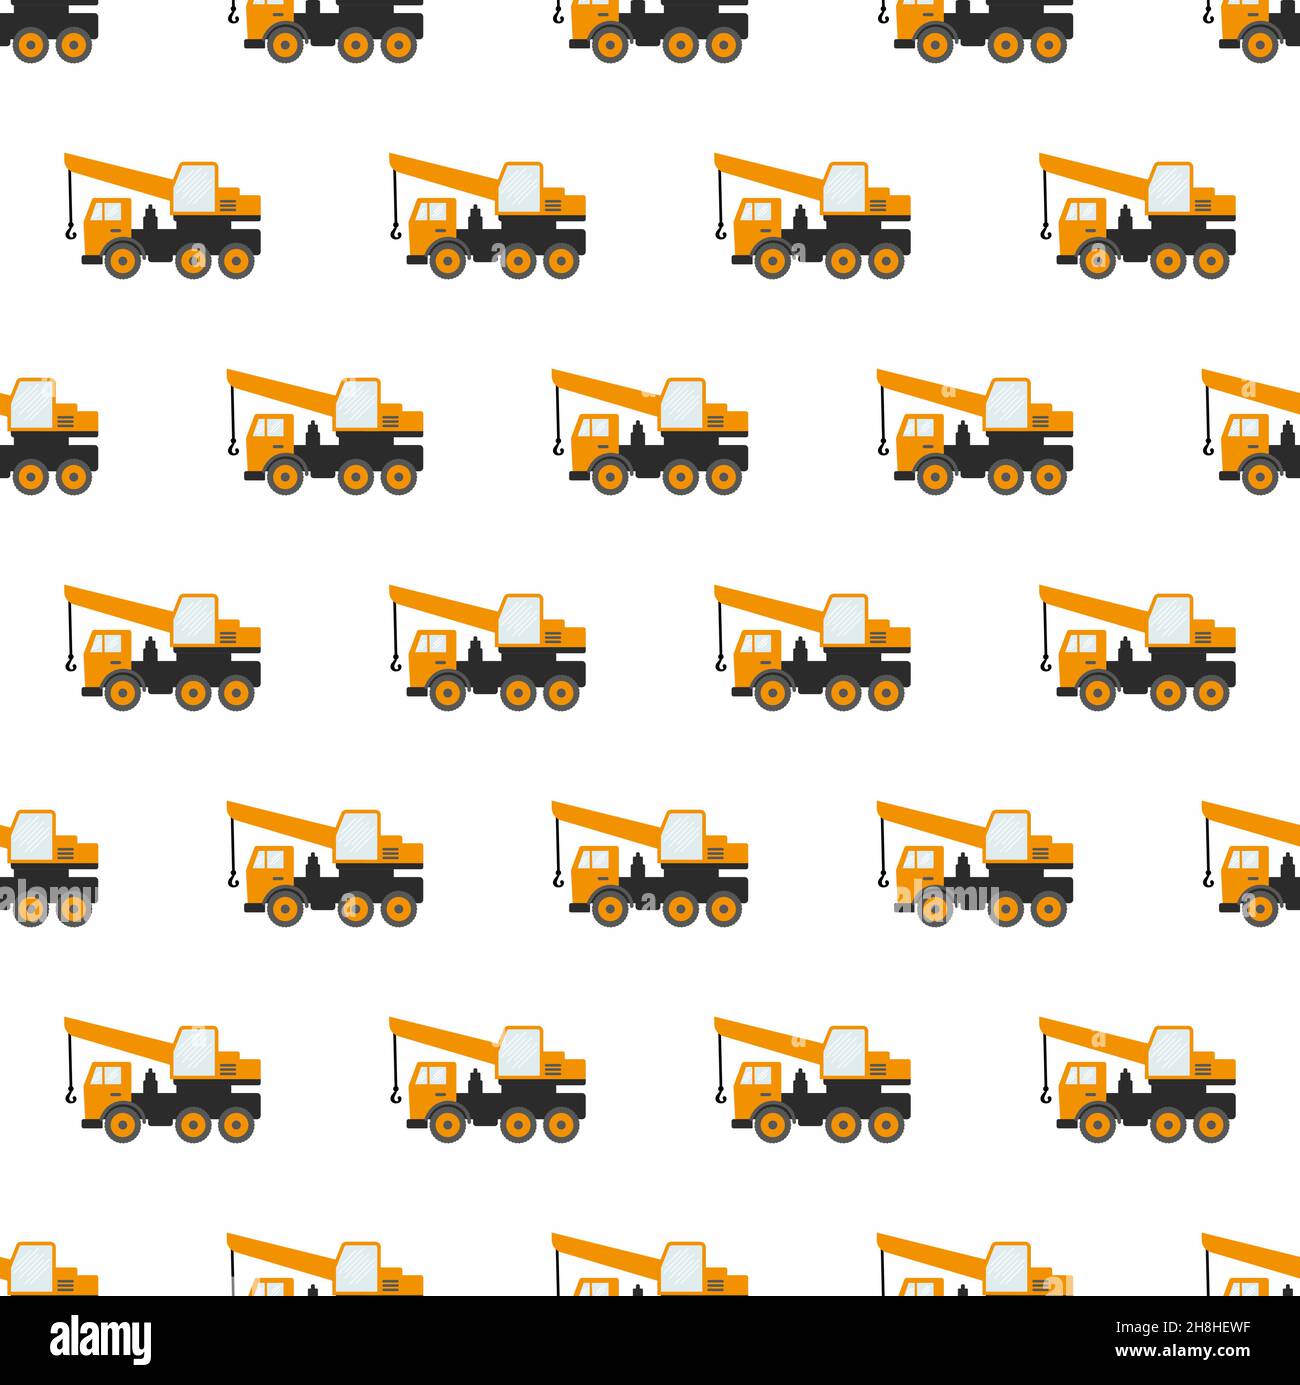 Seamless Pattern With Construction Tracks: Dipper, Bulldozer, Tractor, Excavator, Concrete Mixer Flat Vector Illustration Stock Vector